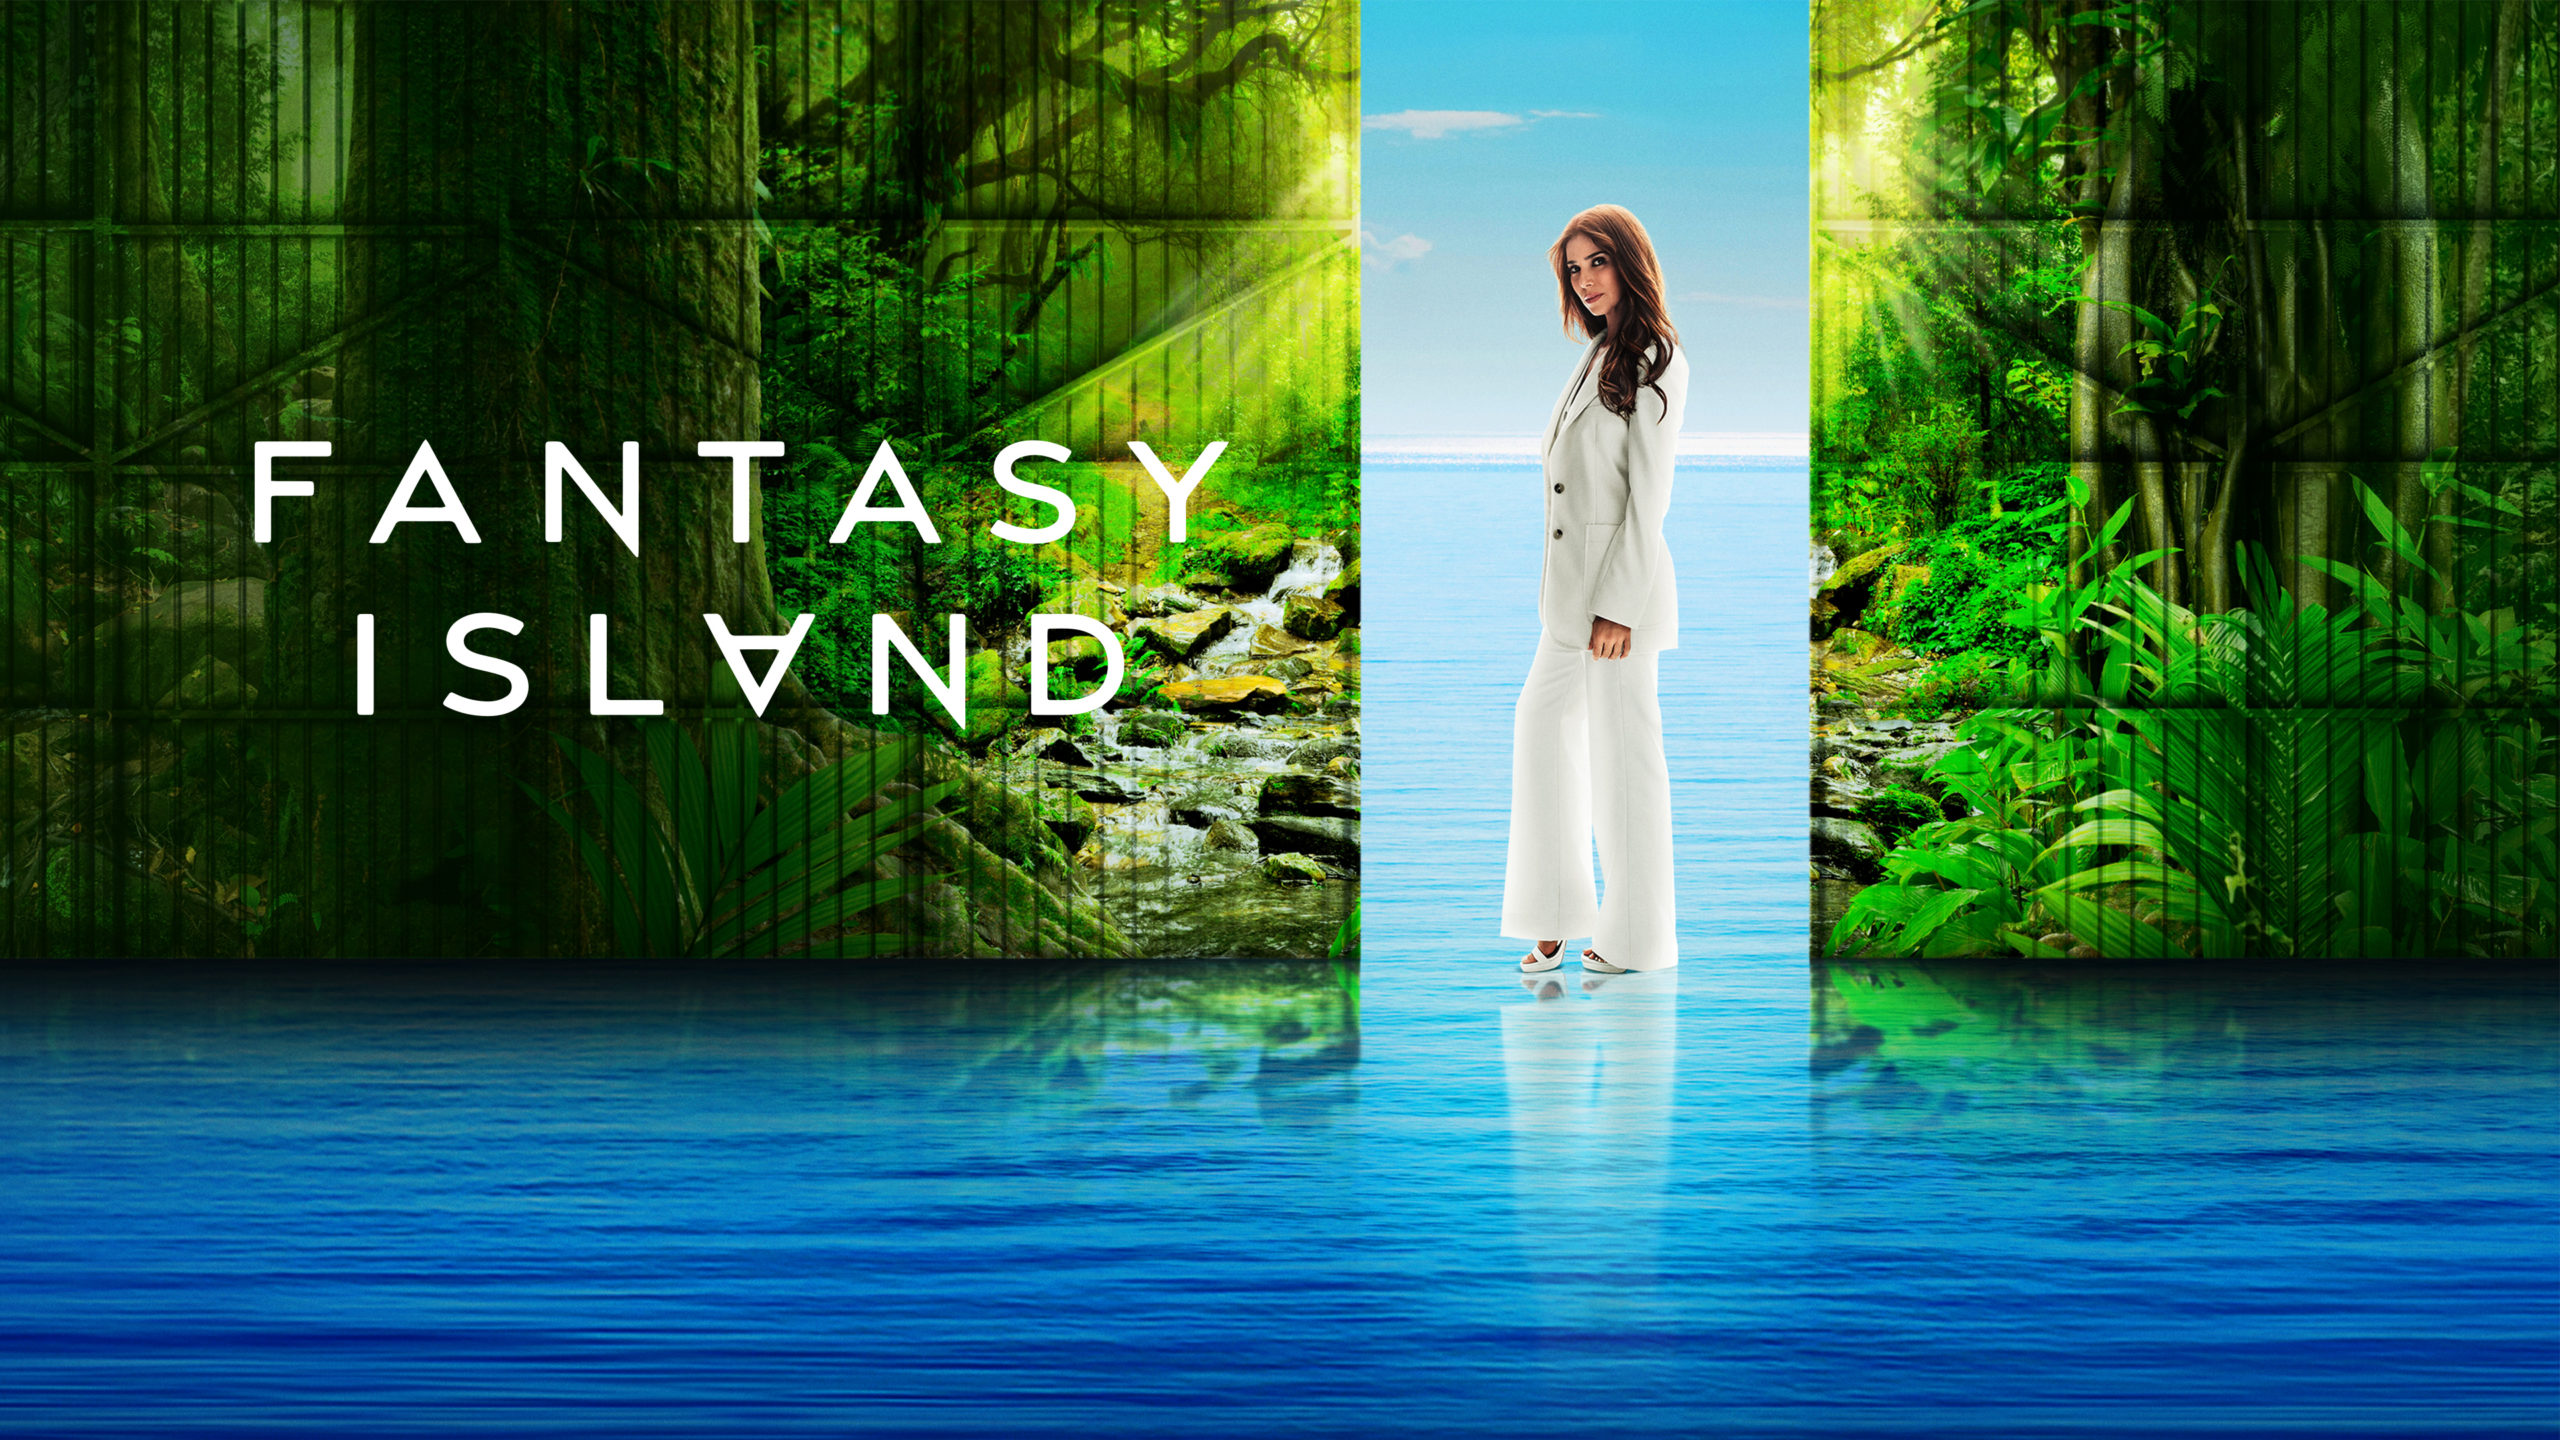 Fantasy Island Where You Have Seen The Cast Of Before?